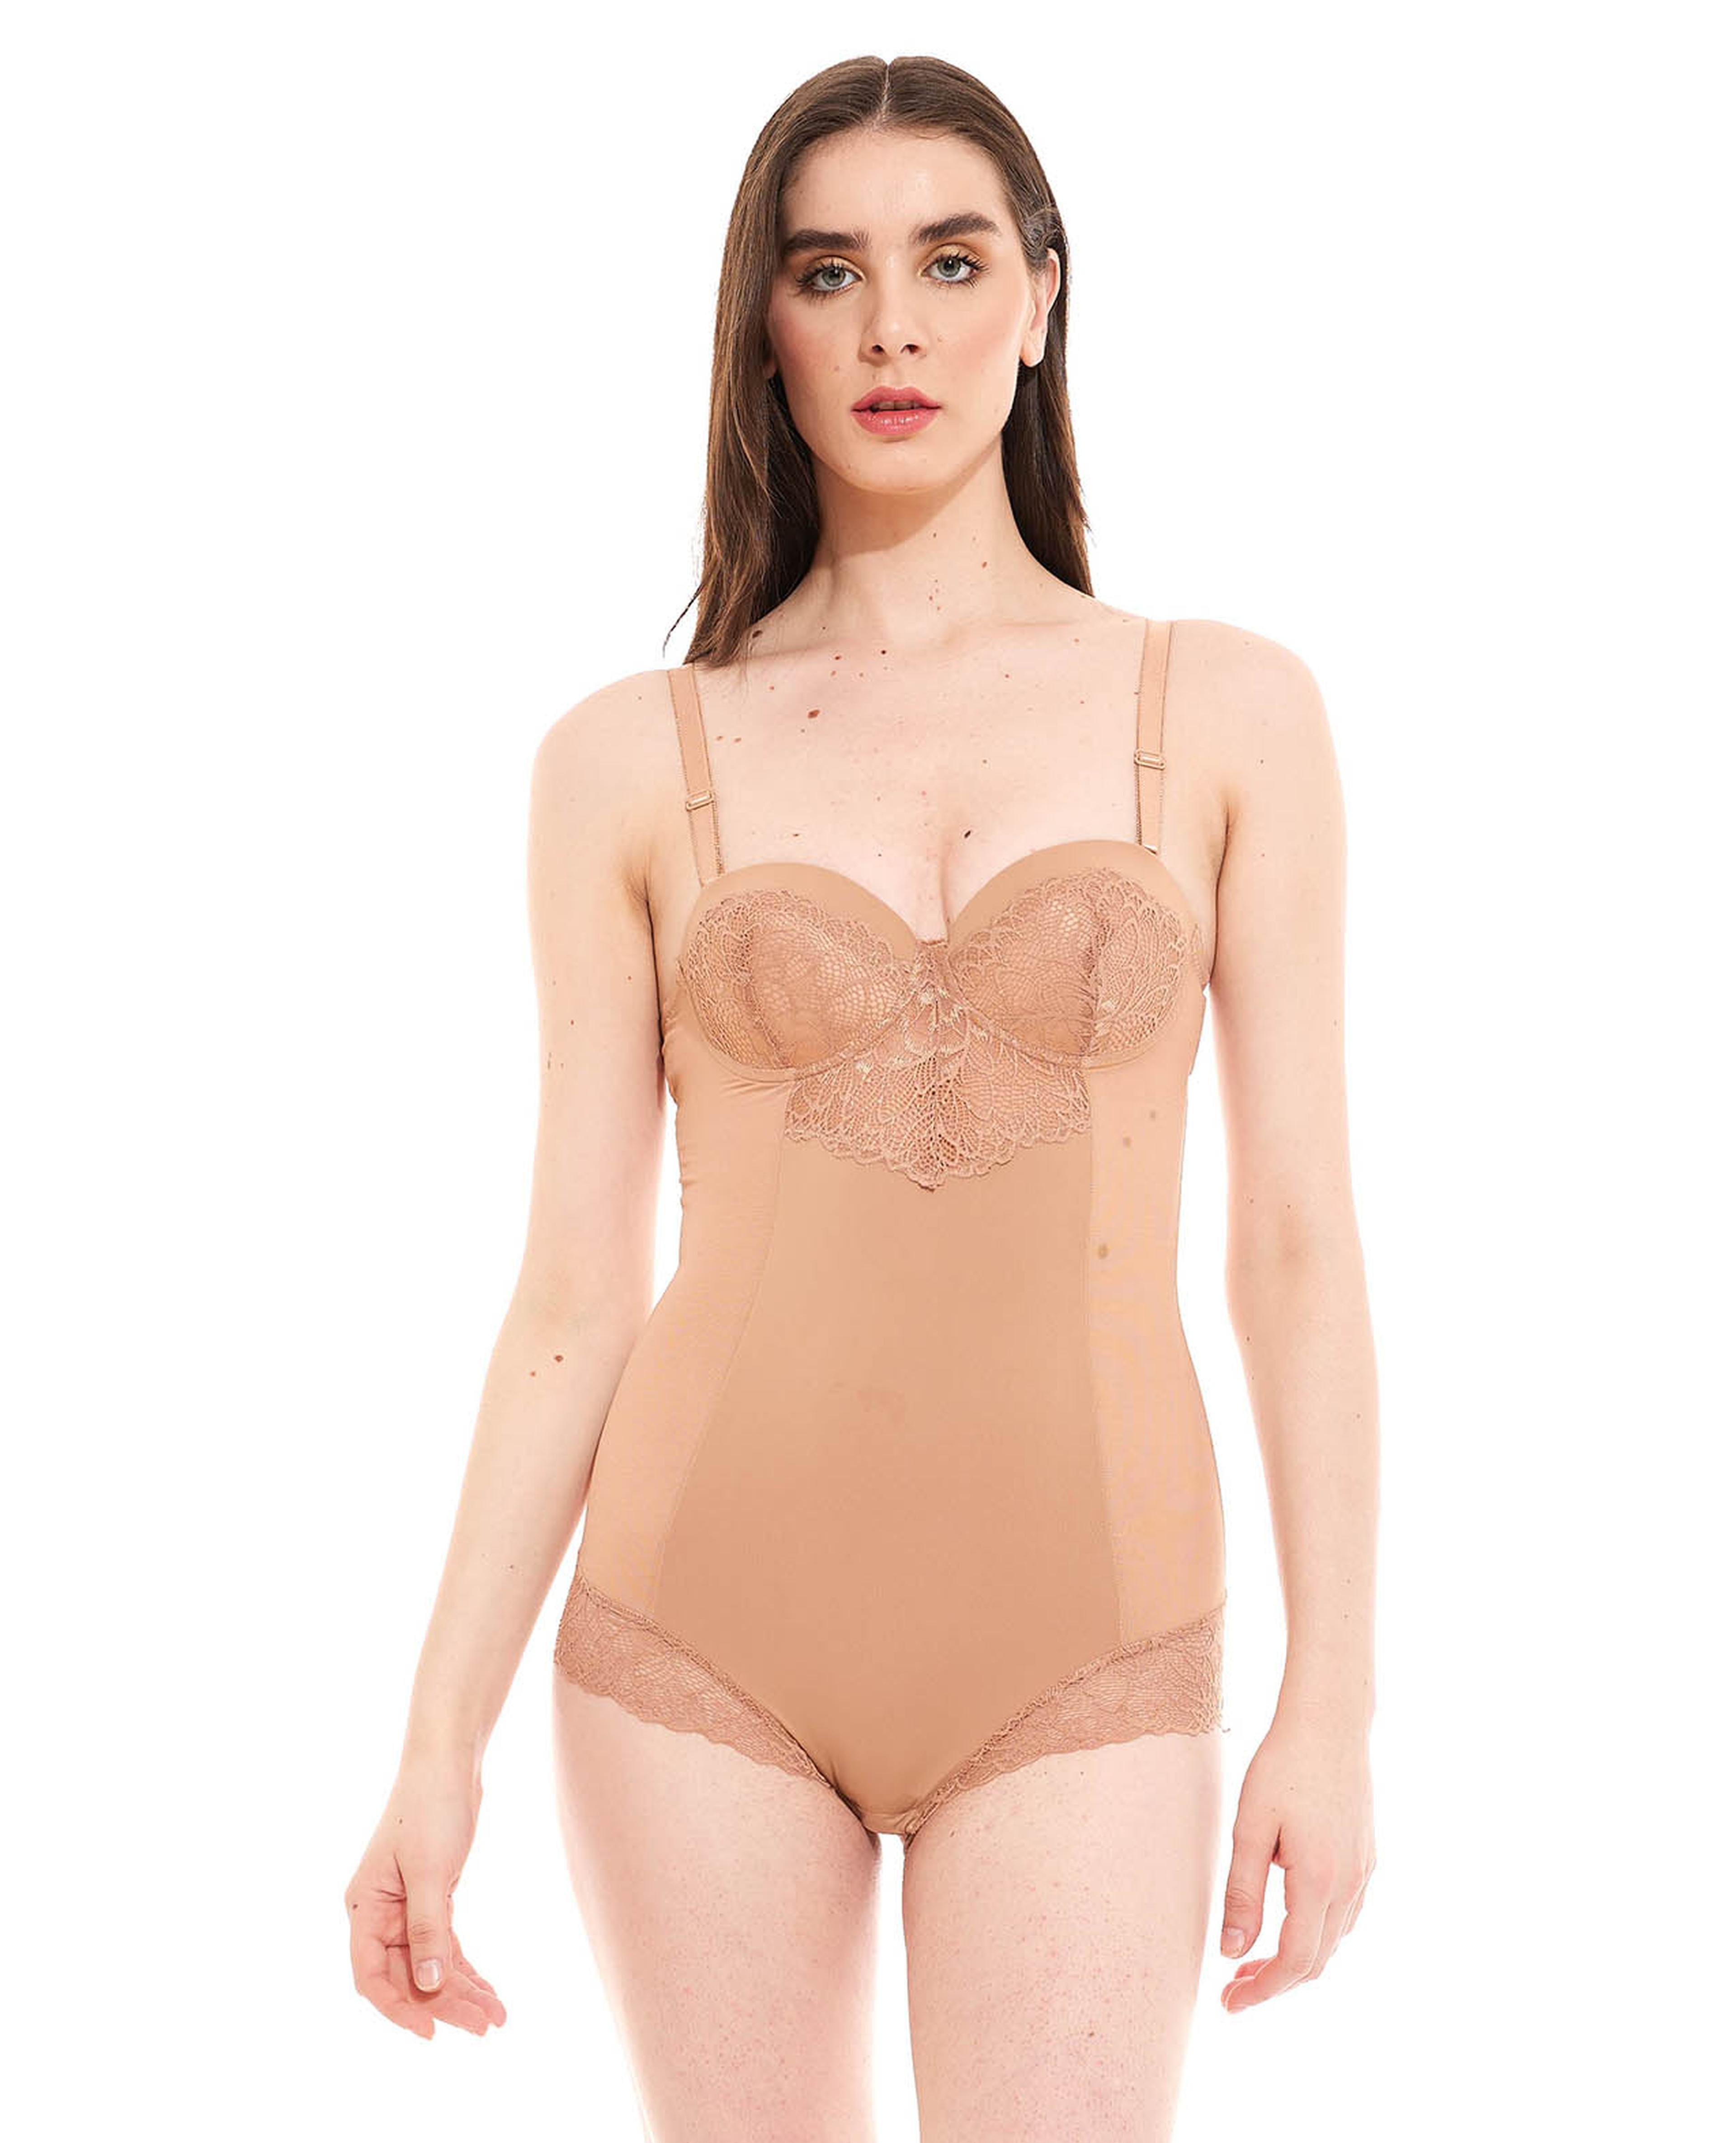 Ruiboury Women Shapewear Enjoy Comfort With Soft And Breathable